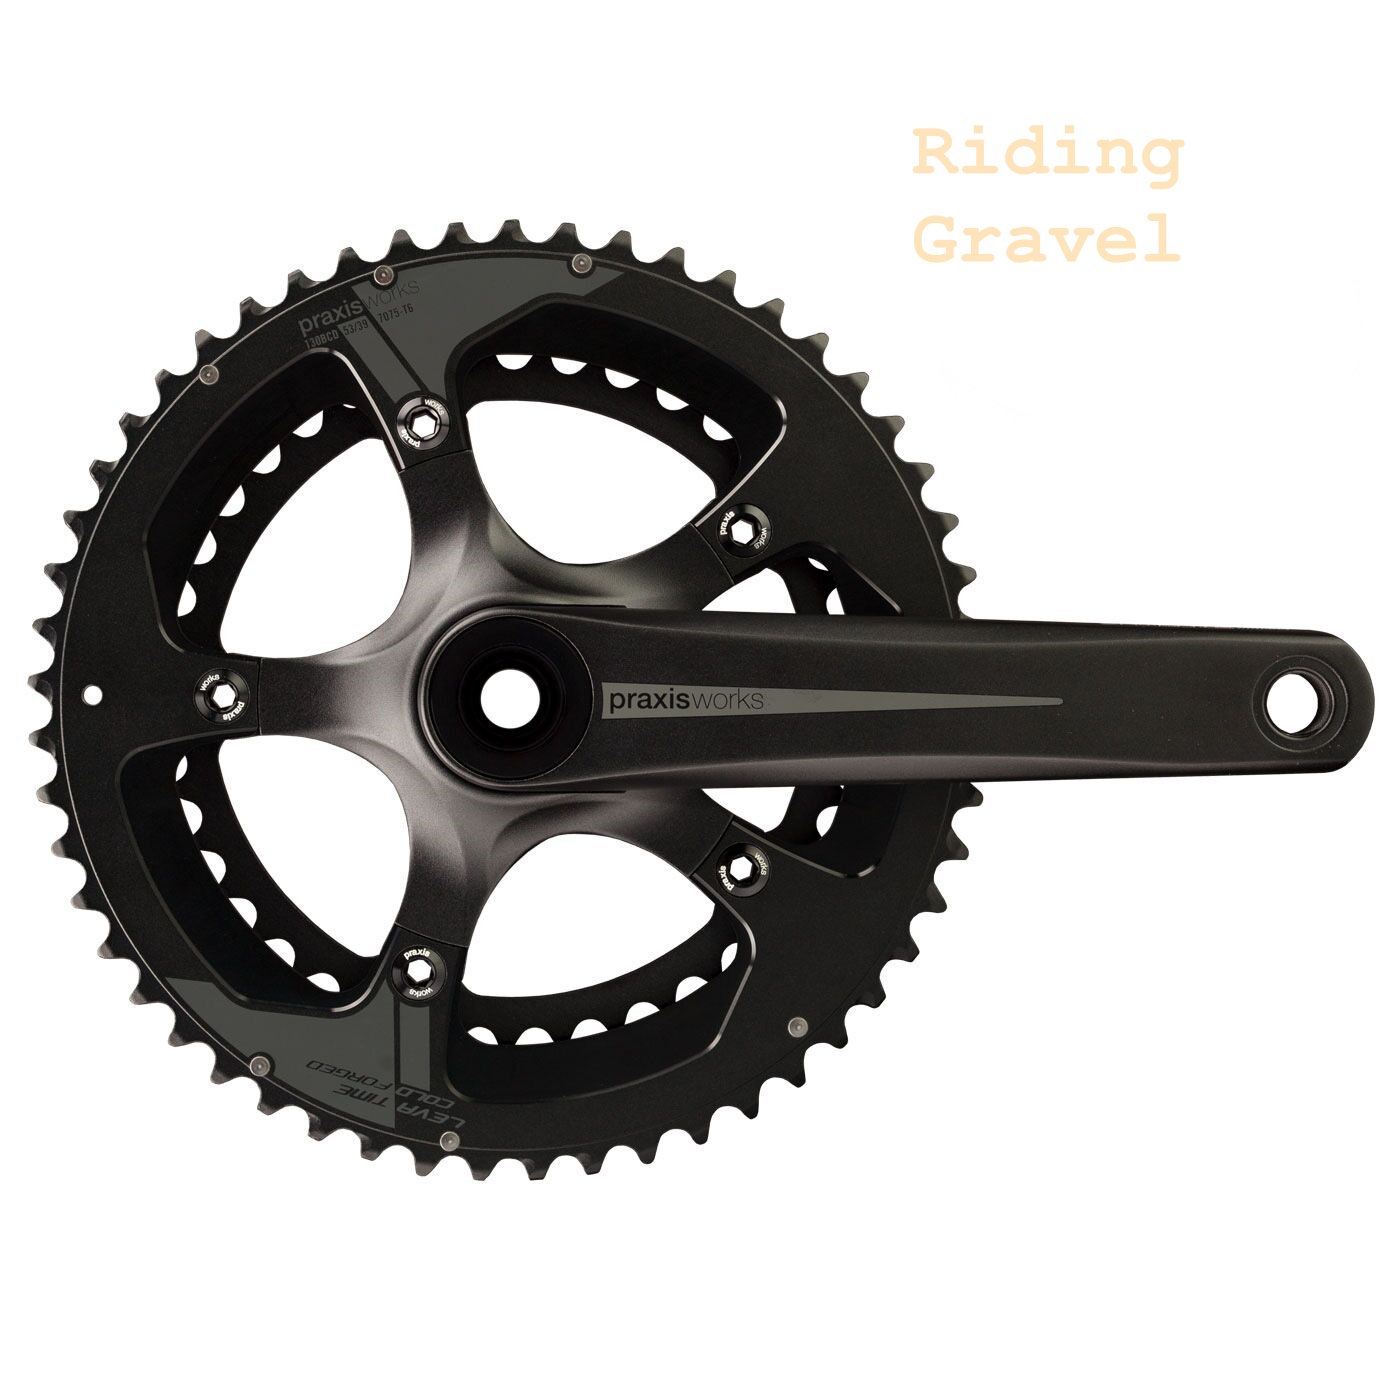 Shimano 105 FC-5700 inner 39T Chainring 130BCD 5 Arm Black Fit Ultegra